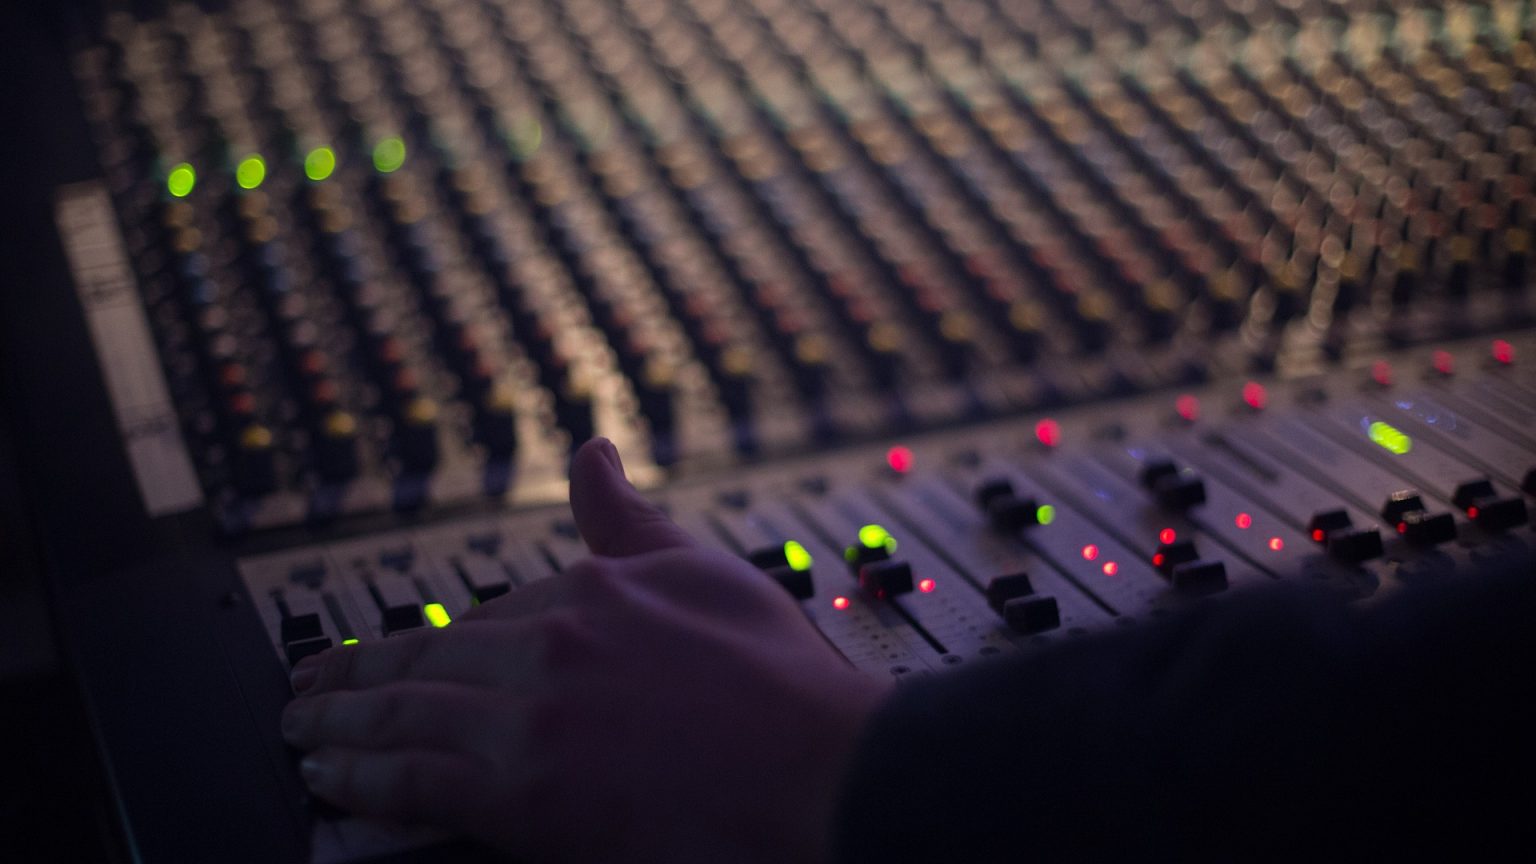 Do I a mixer in my studio? Optoproductions